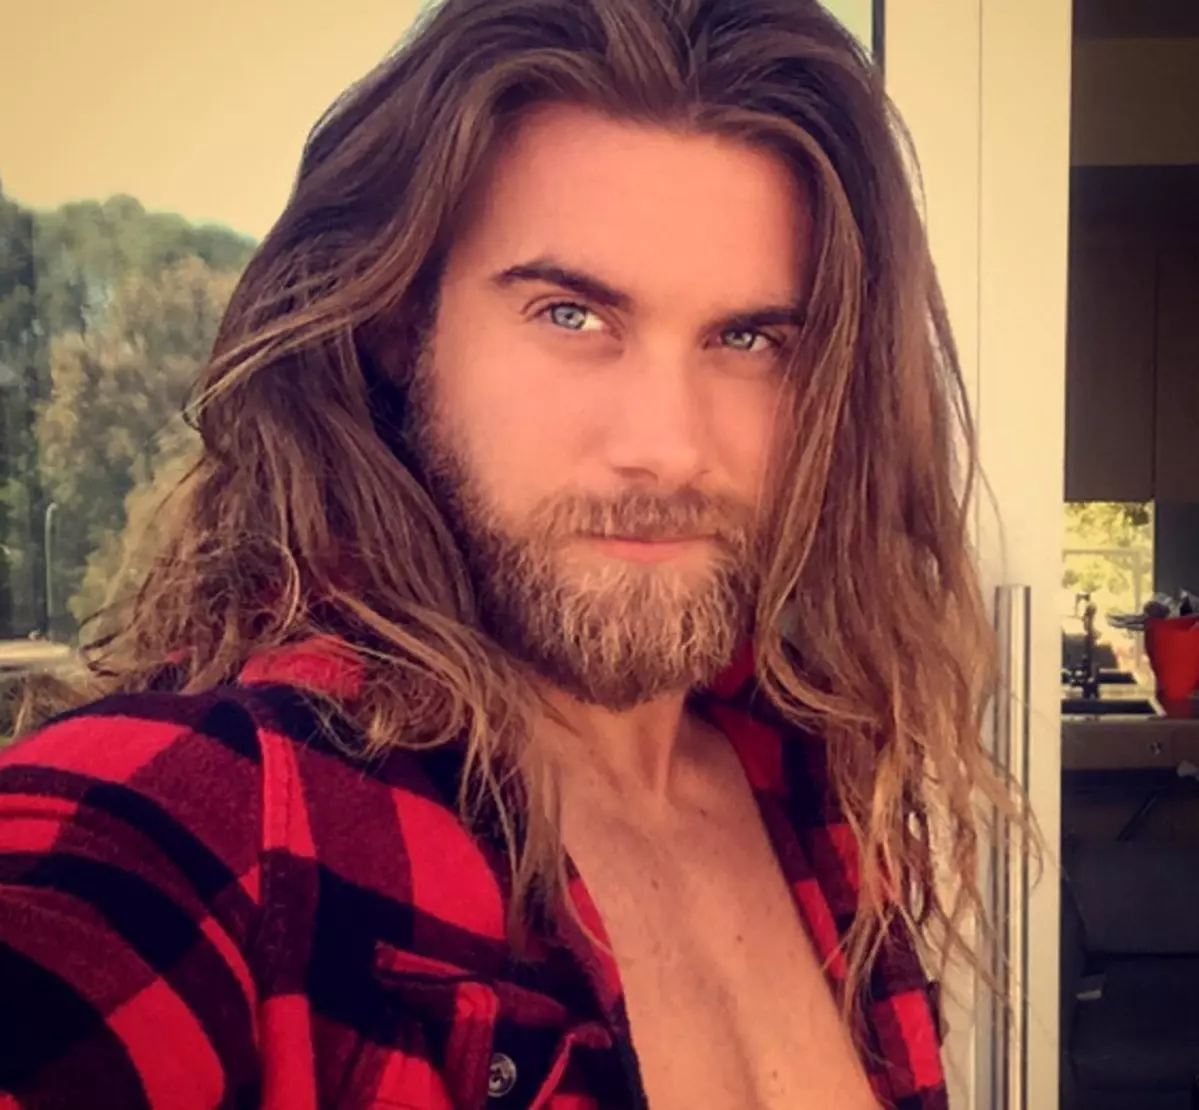 Our Man Crush Monday is Brock O'Hurn